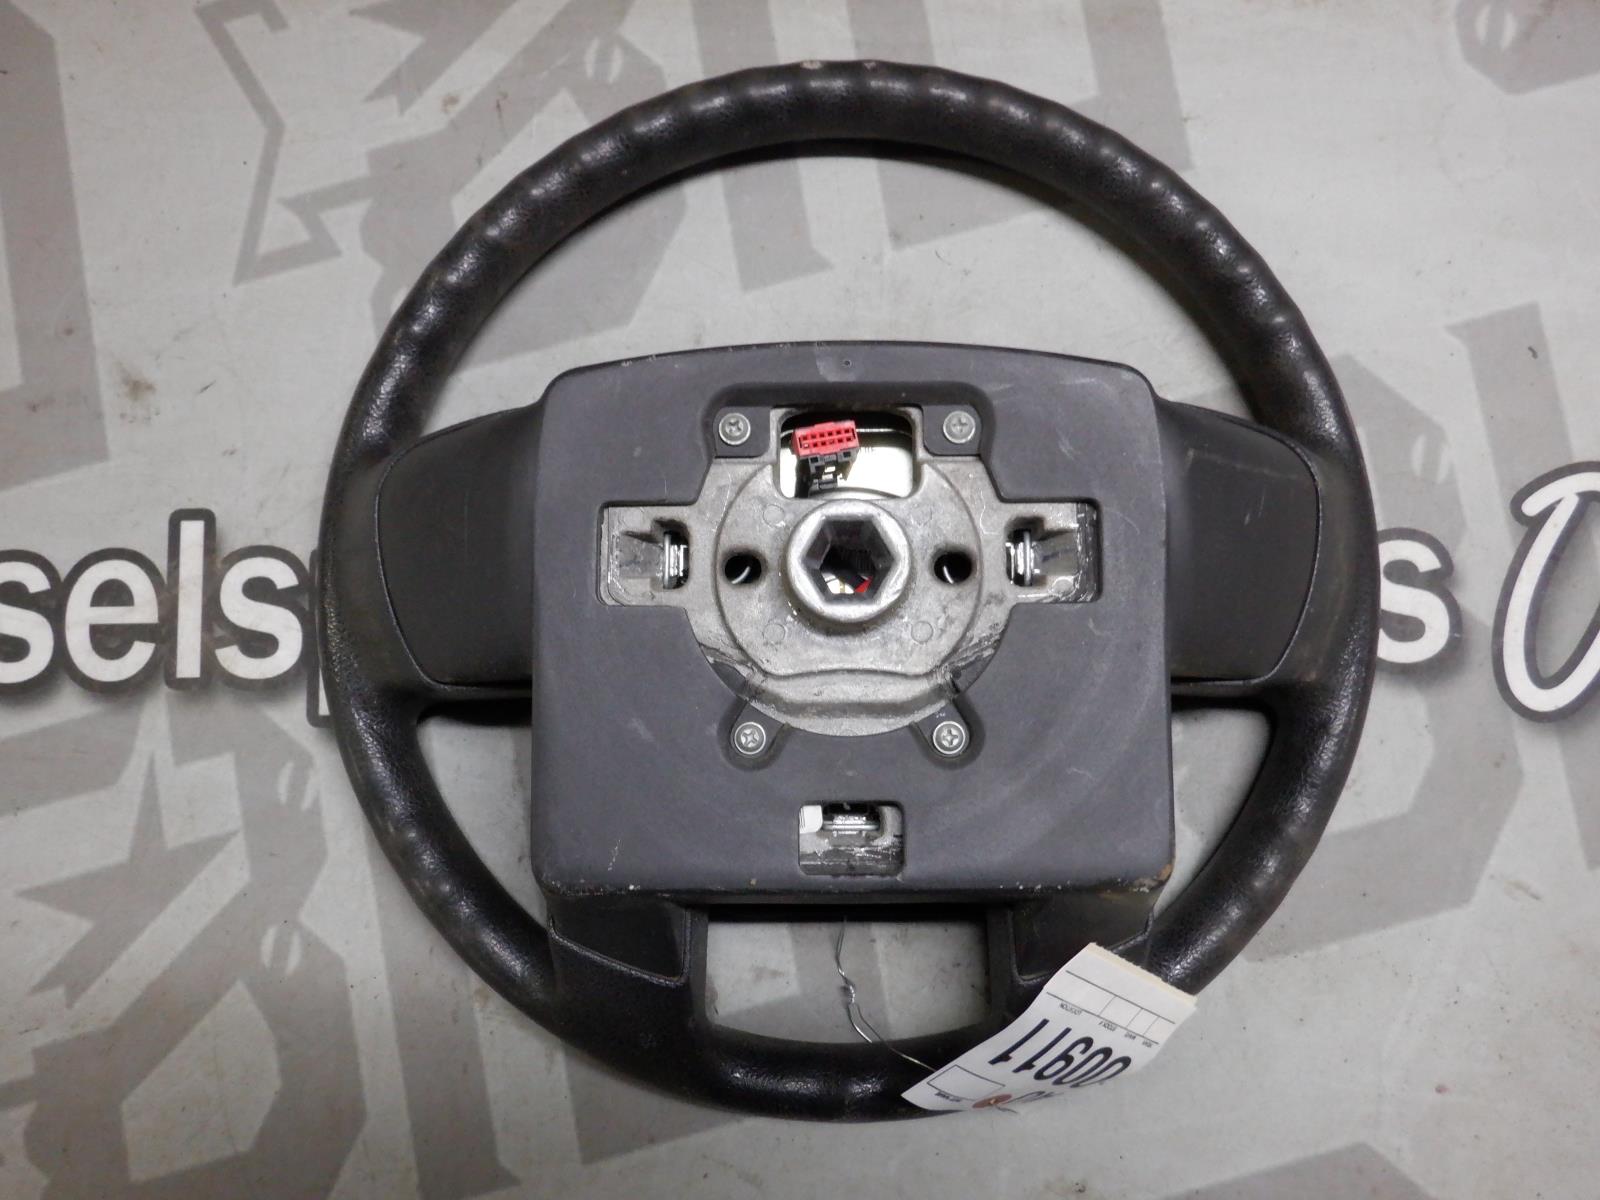 2008 - 2010 FORD F350 F250 XLT OEM STEERING WHEEL (BLACK) CRUISE 2008 F350 Cruise Control Not Working